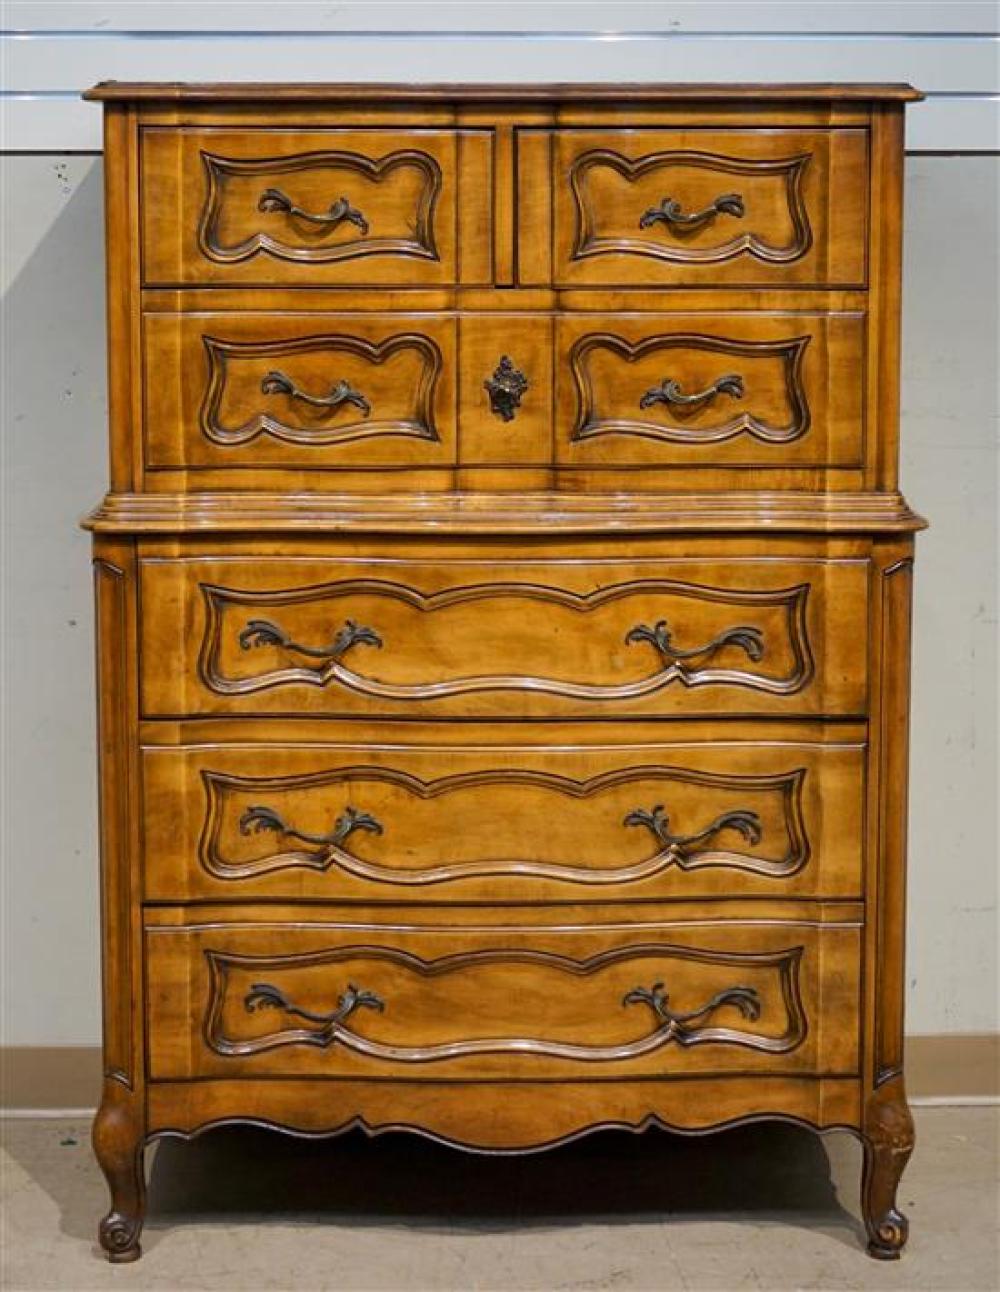 PROVINCIAL STYLE FRUITWOOD CHEST 31f93a